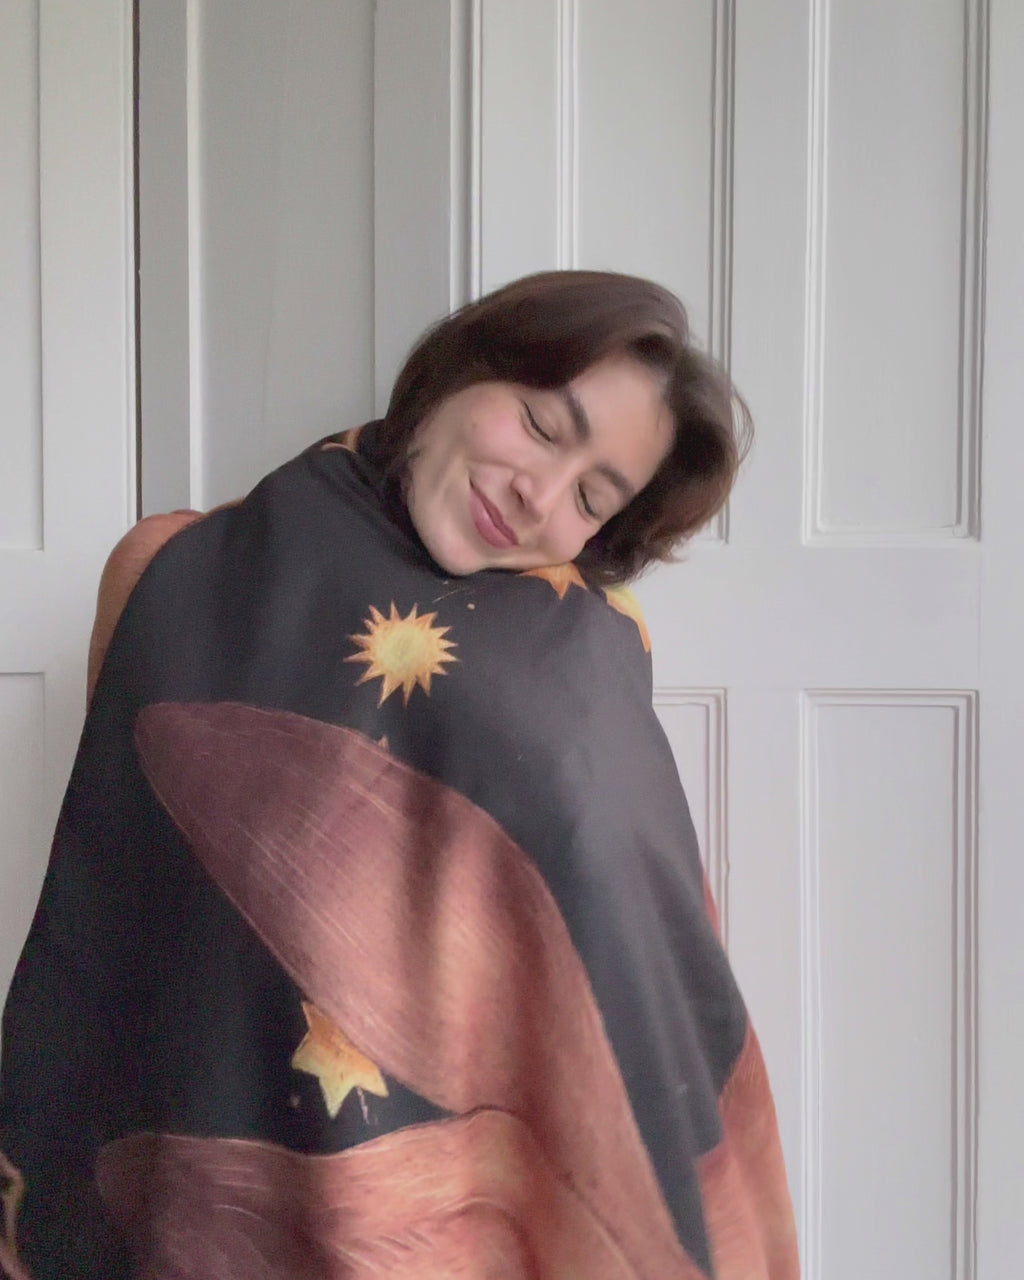 Jessica Roux Tarot Tales The Empress Blanket Scarf by Fable England